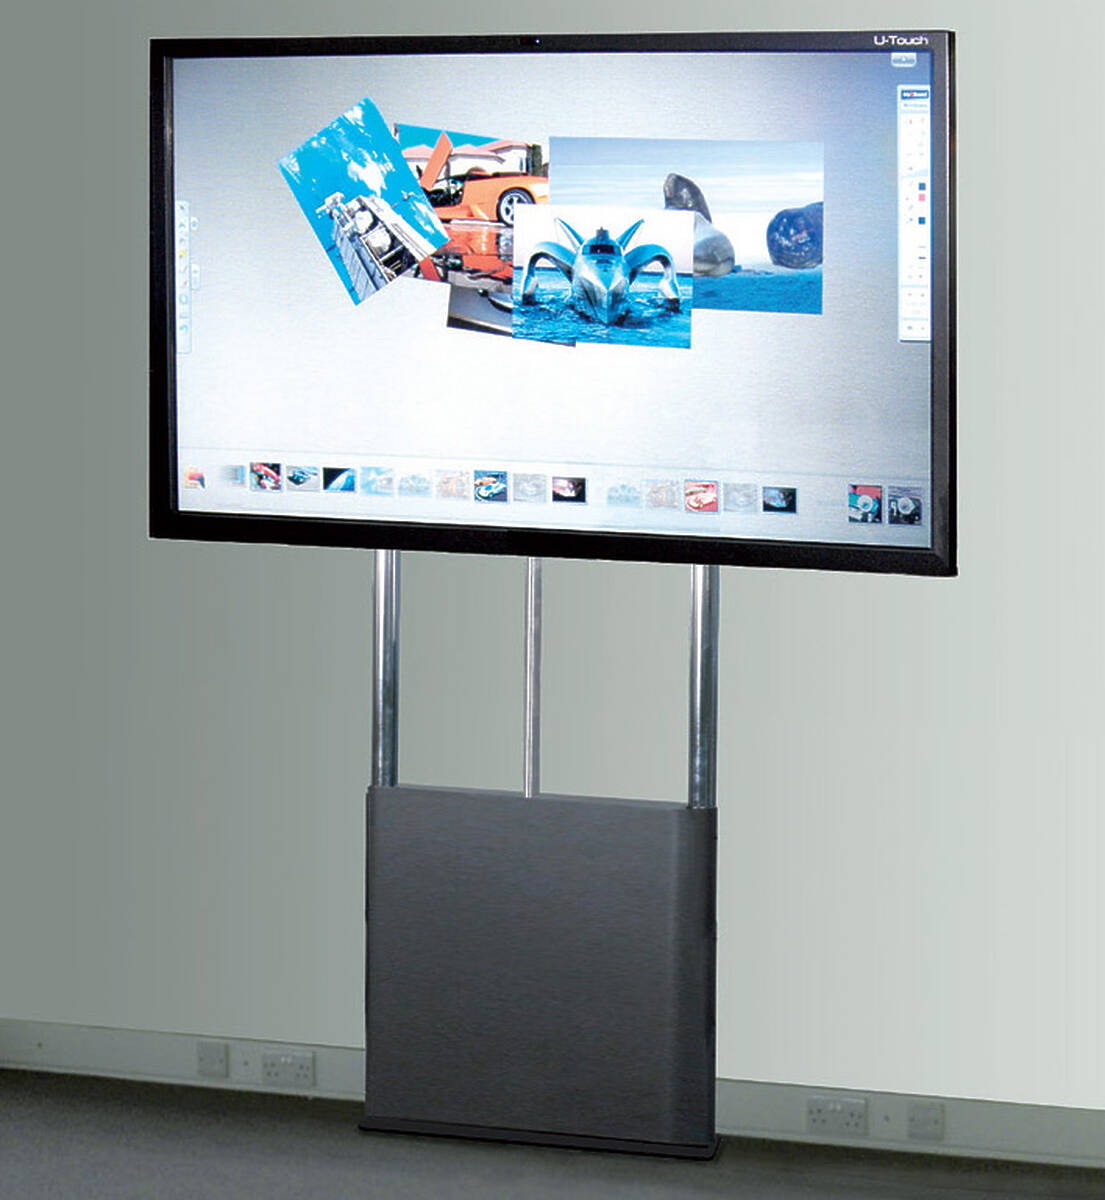 Unicol AVMW71 PowaLift Floor-to-Wall electric monitor lift for 33-70" Large Format Displays product image. Click to enlarge.